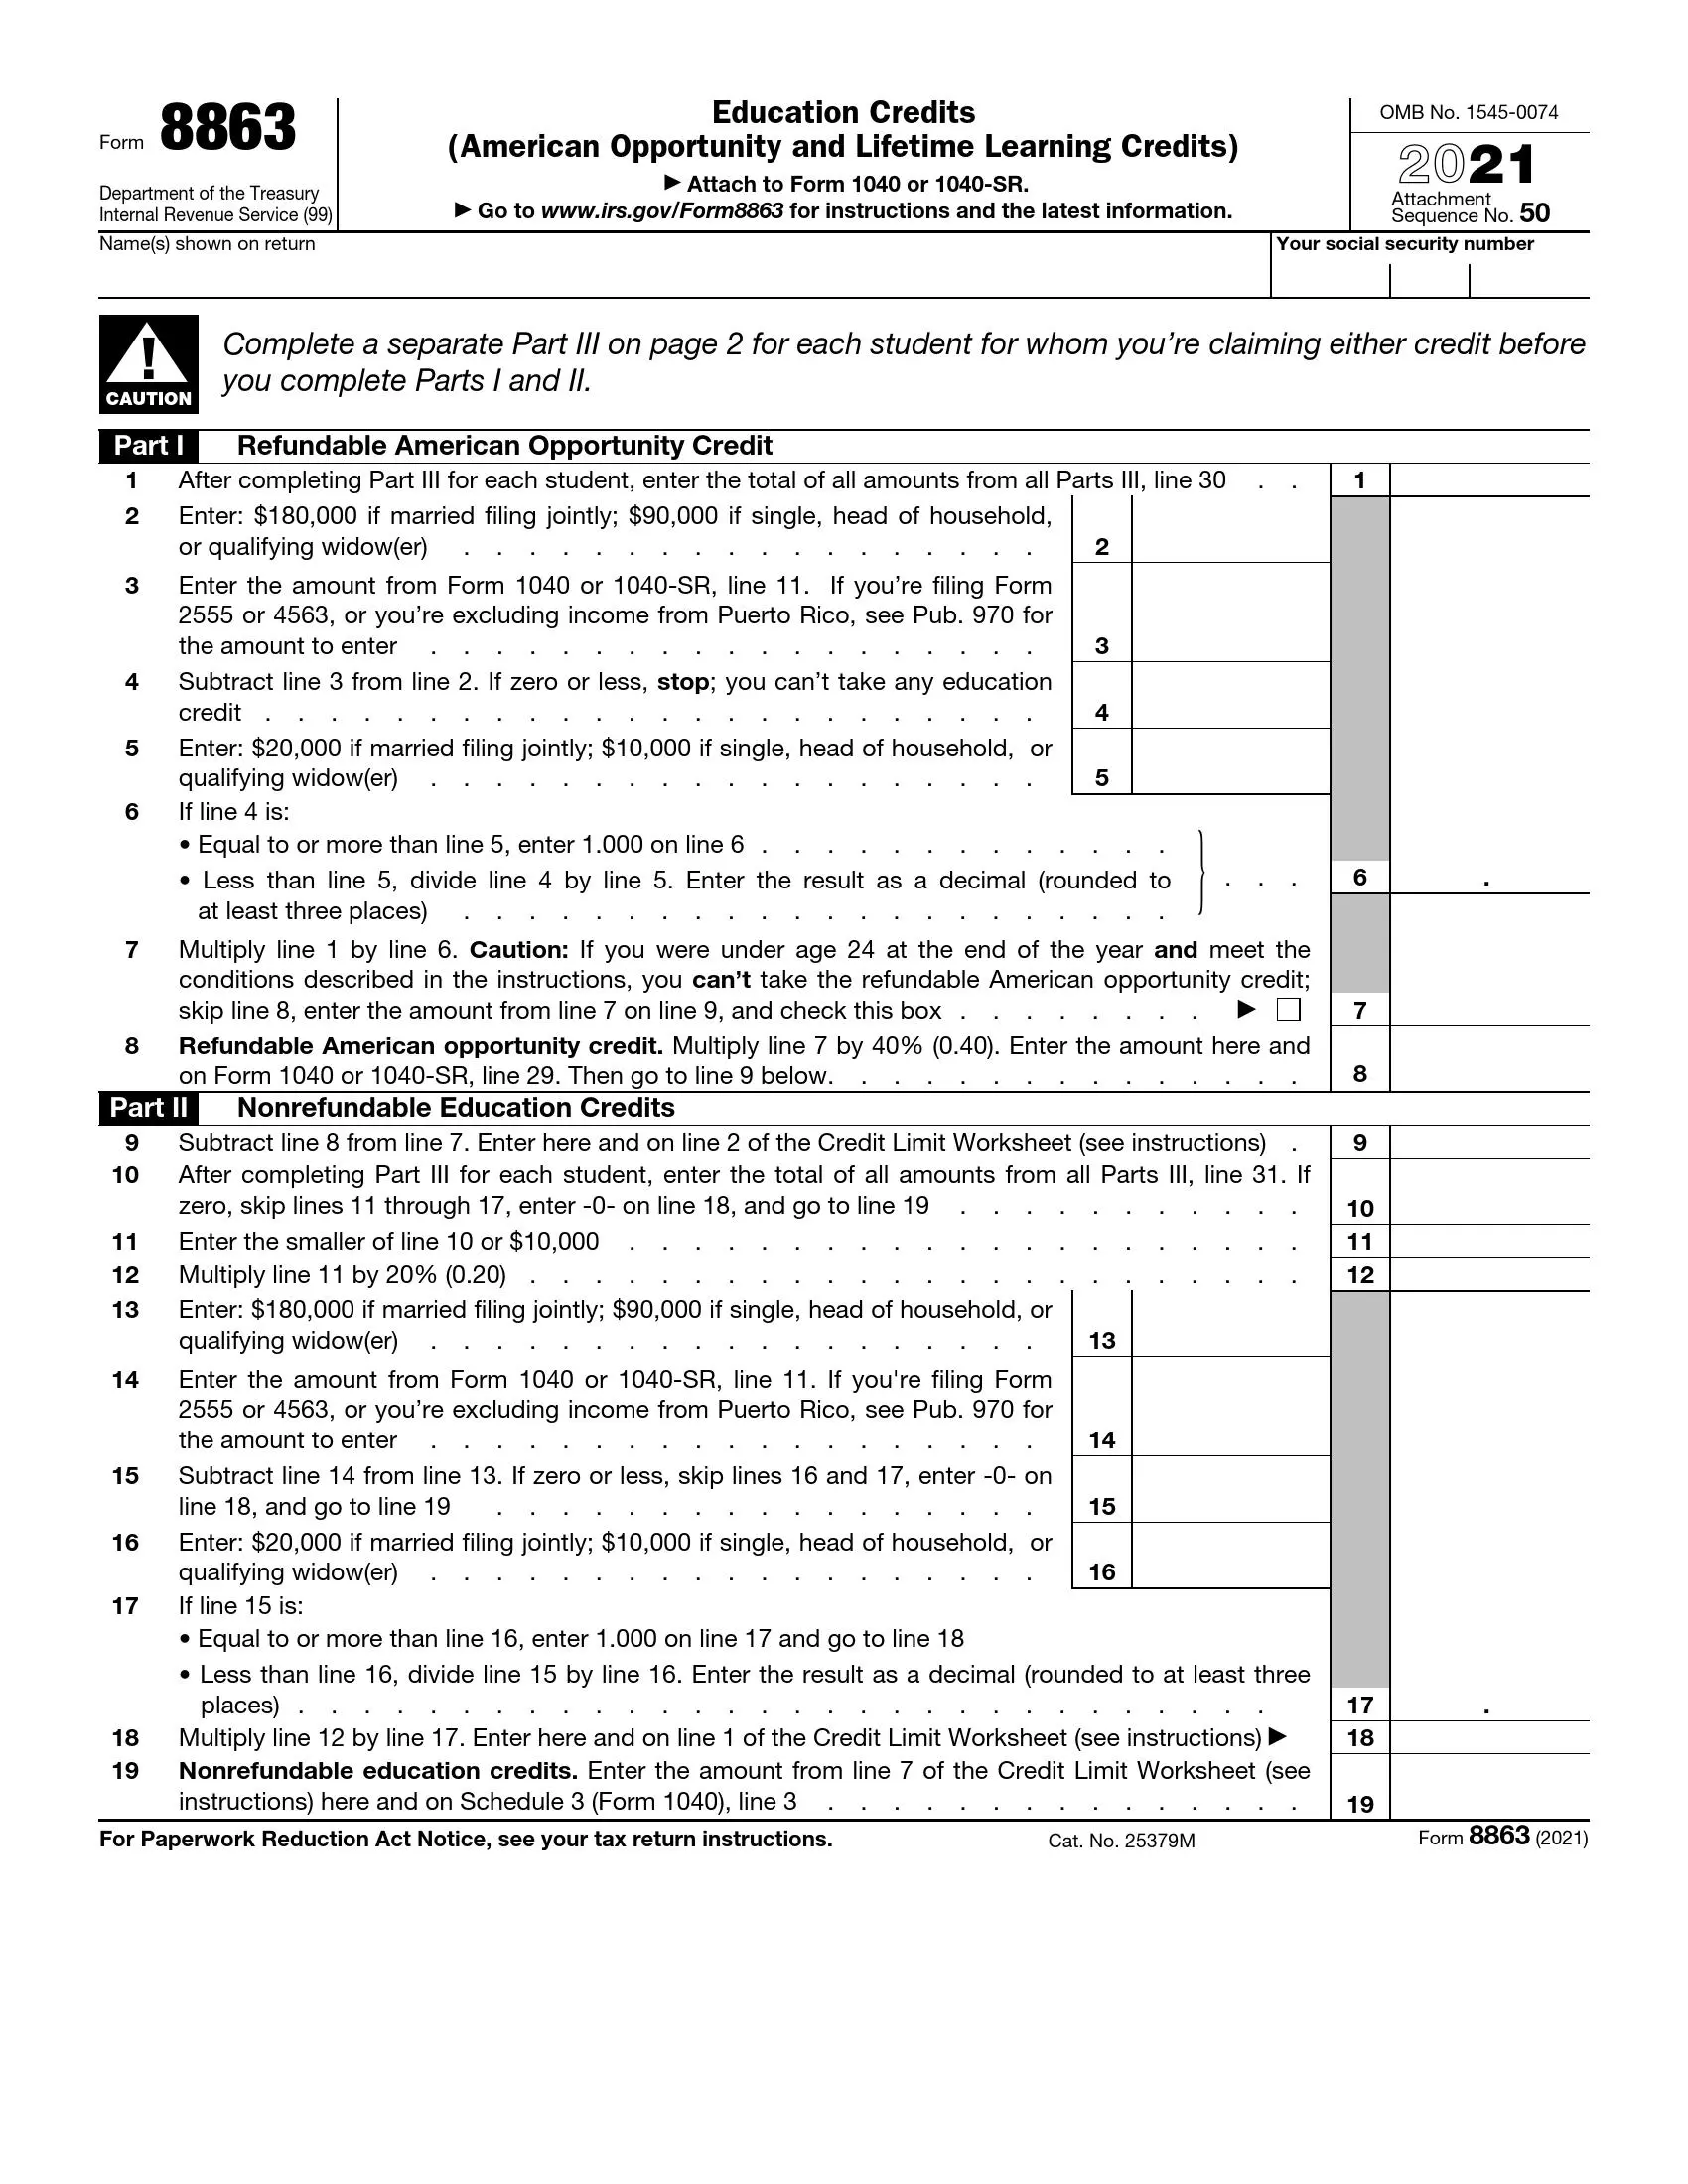 irs form 8863 2021 preview